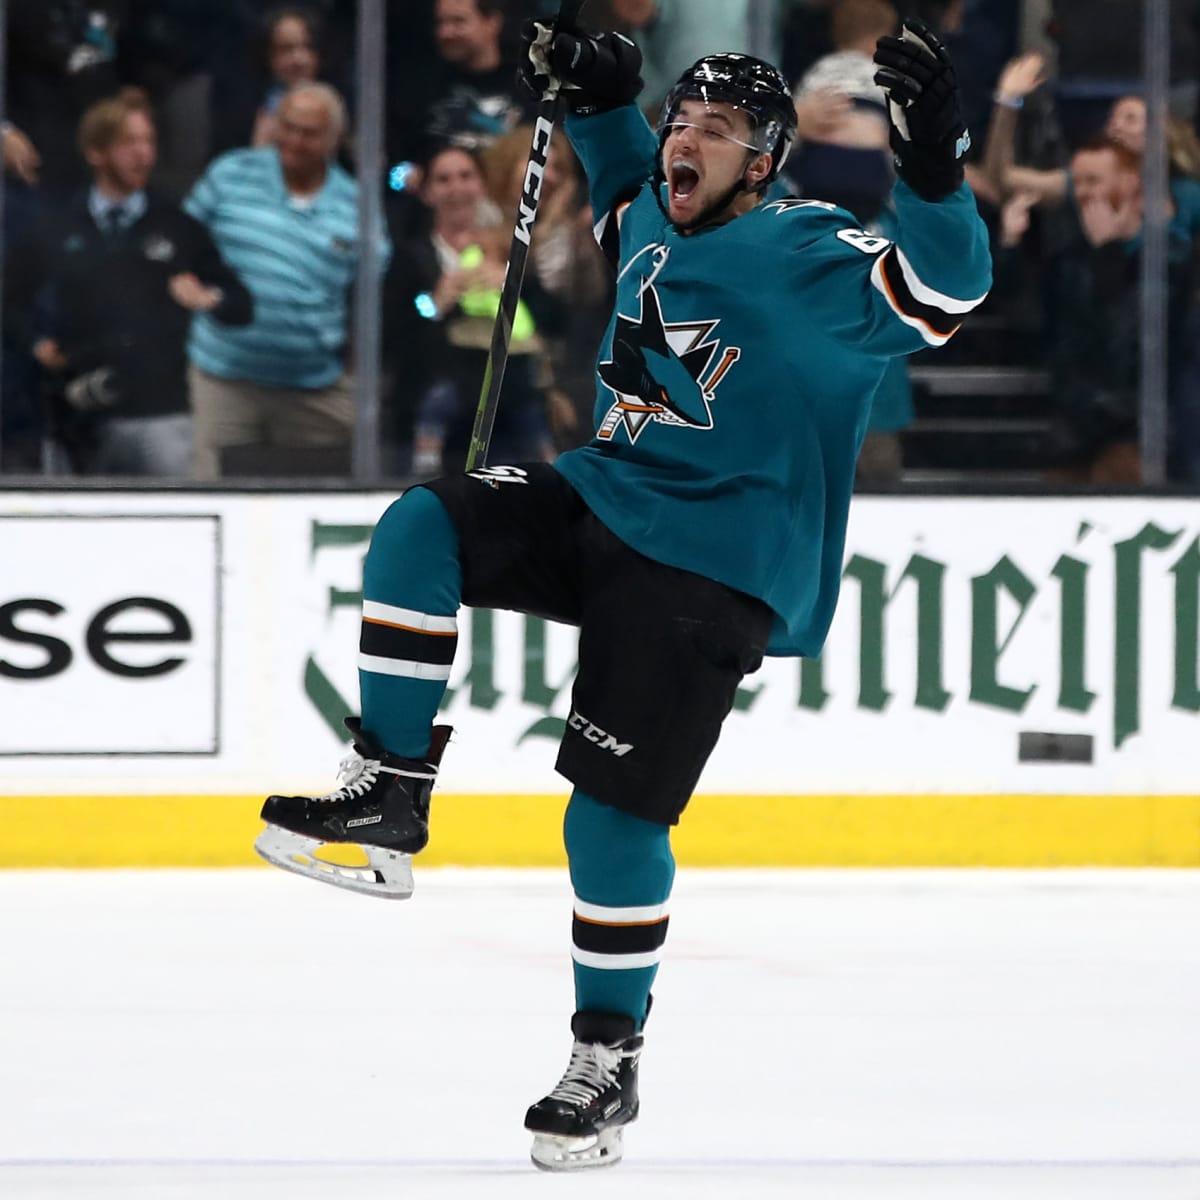 Depth scoring leads Golden Knights to victory as Vegas defeats Sharks 4-1  to improve to 2-0-0 - Knights On Ice